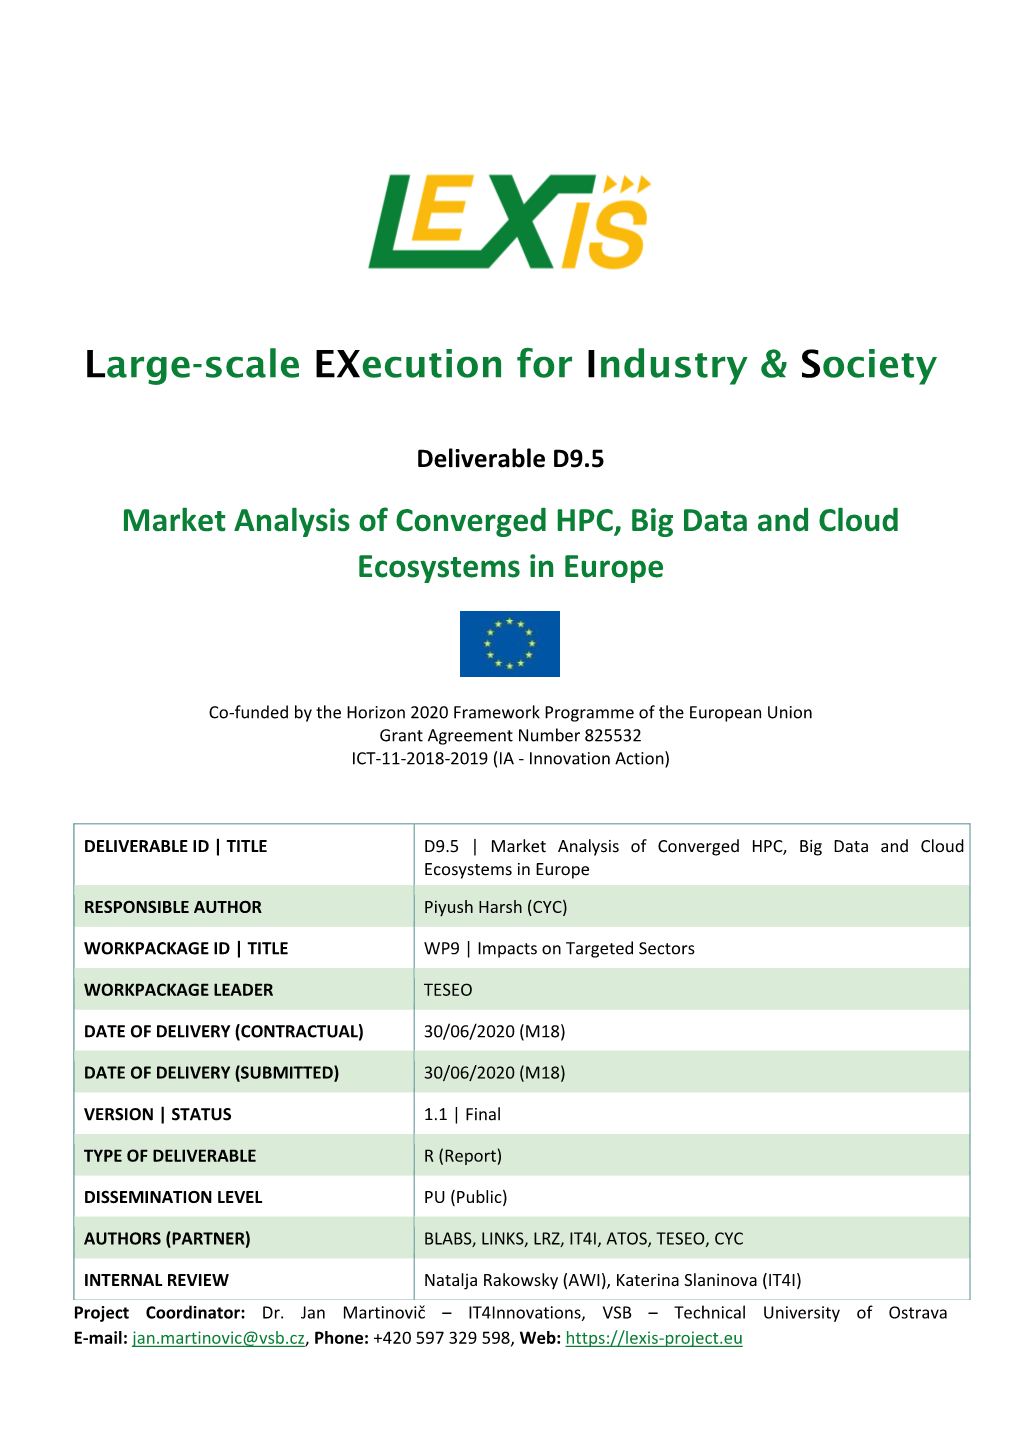 D9.5 Market Analysis of Converged HPC, Big Data and Cloud Ecosystems in Europe